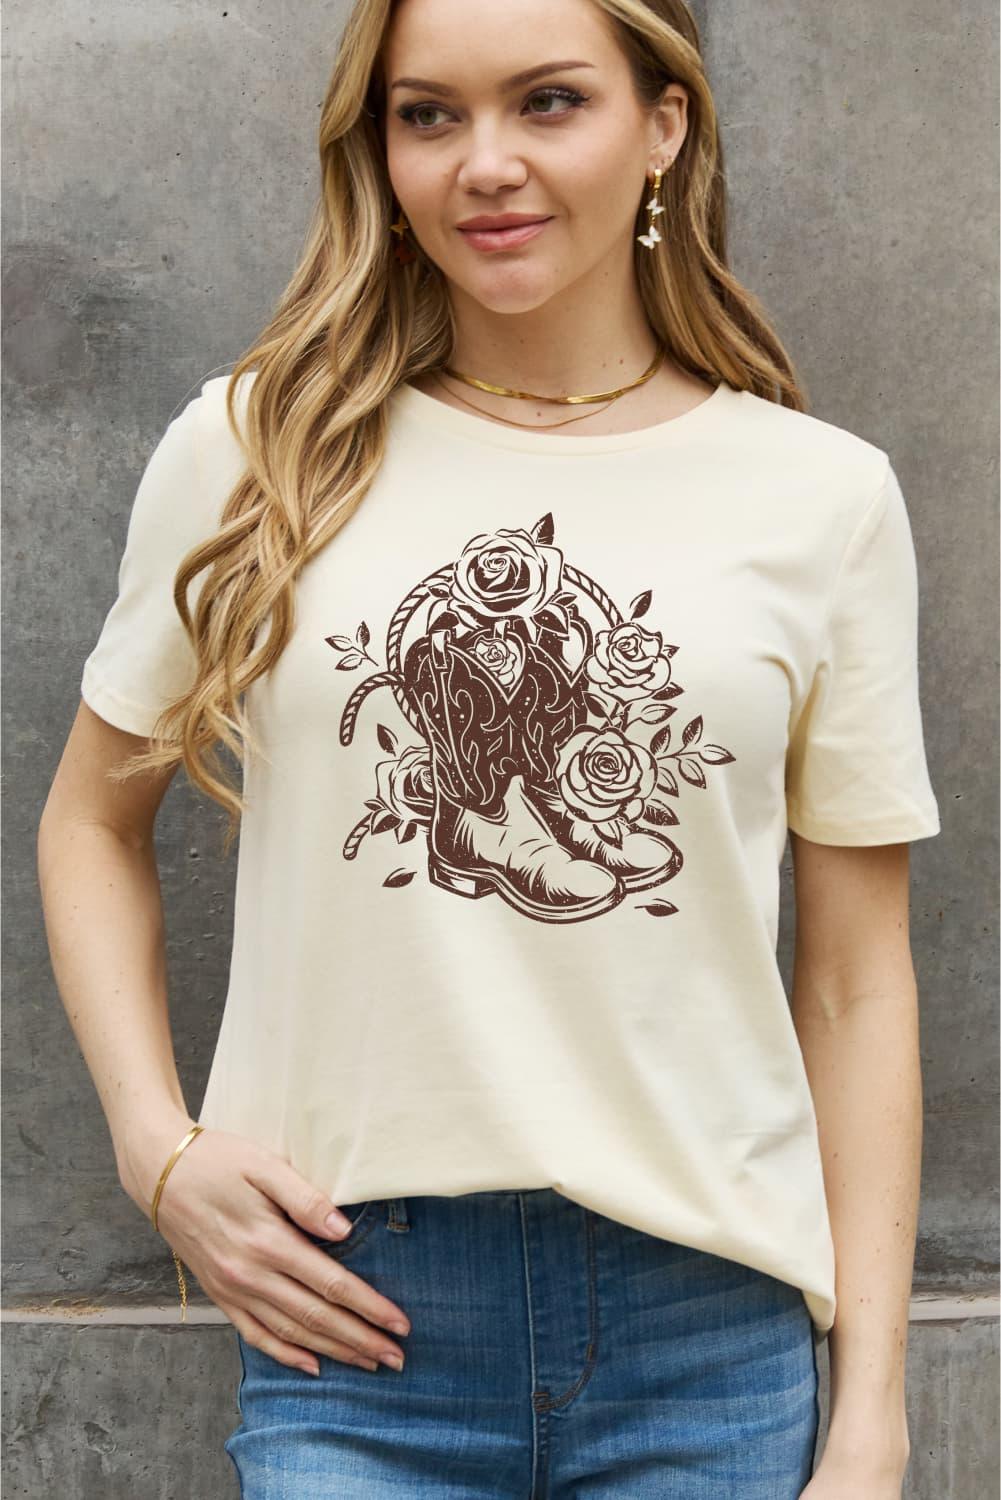 Simply Love Full Size Cowboy Boots Flower Graphic Cotton Tee - Lucianne Boutique